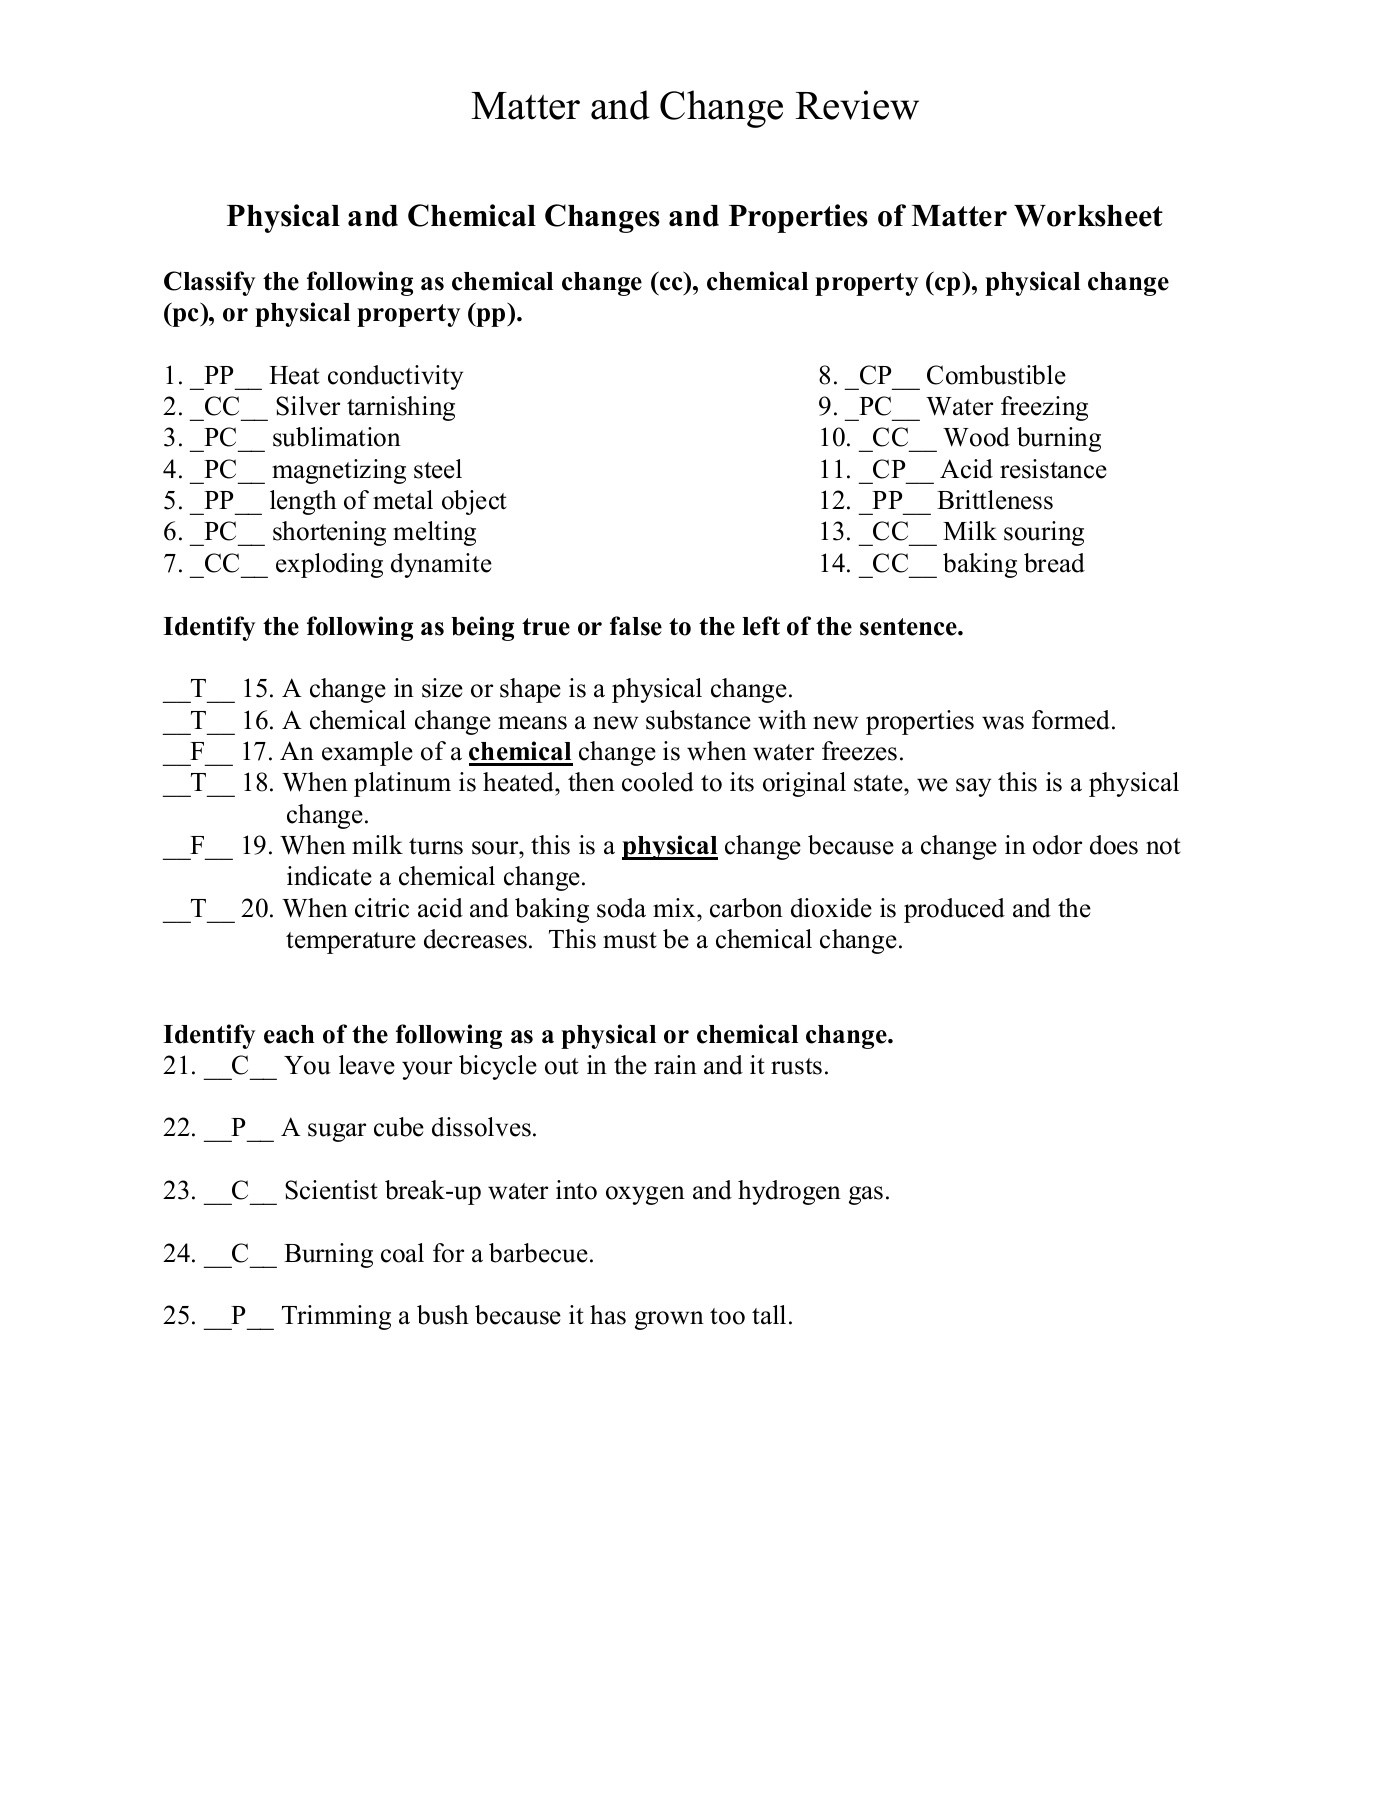 Physical and Chemical Change Worksheet Matter and Change Review Campusesrtbendisd Pages 1